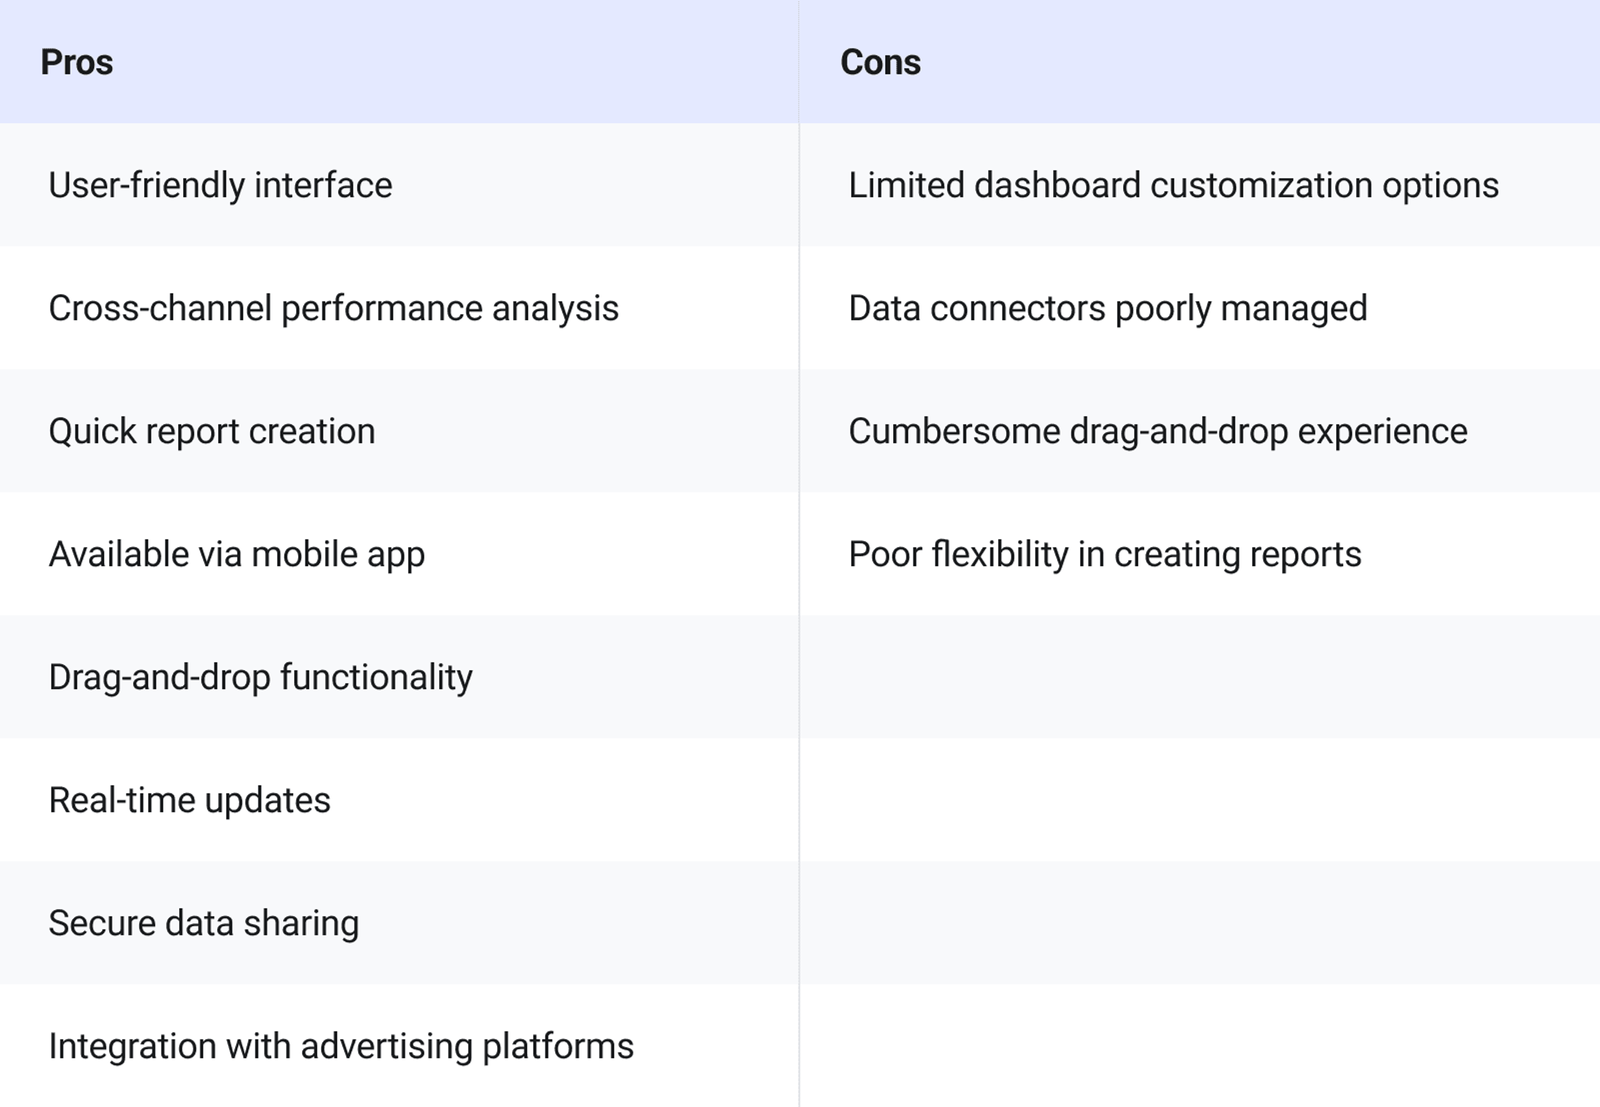 DashThis Data Analytics Tool Pros and Cons